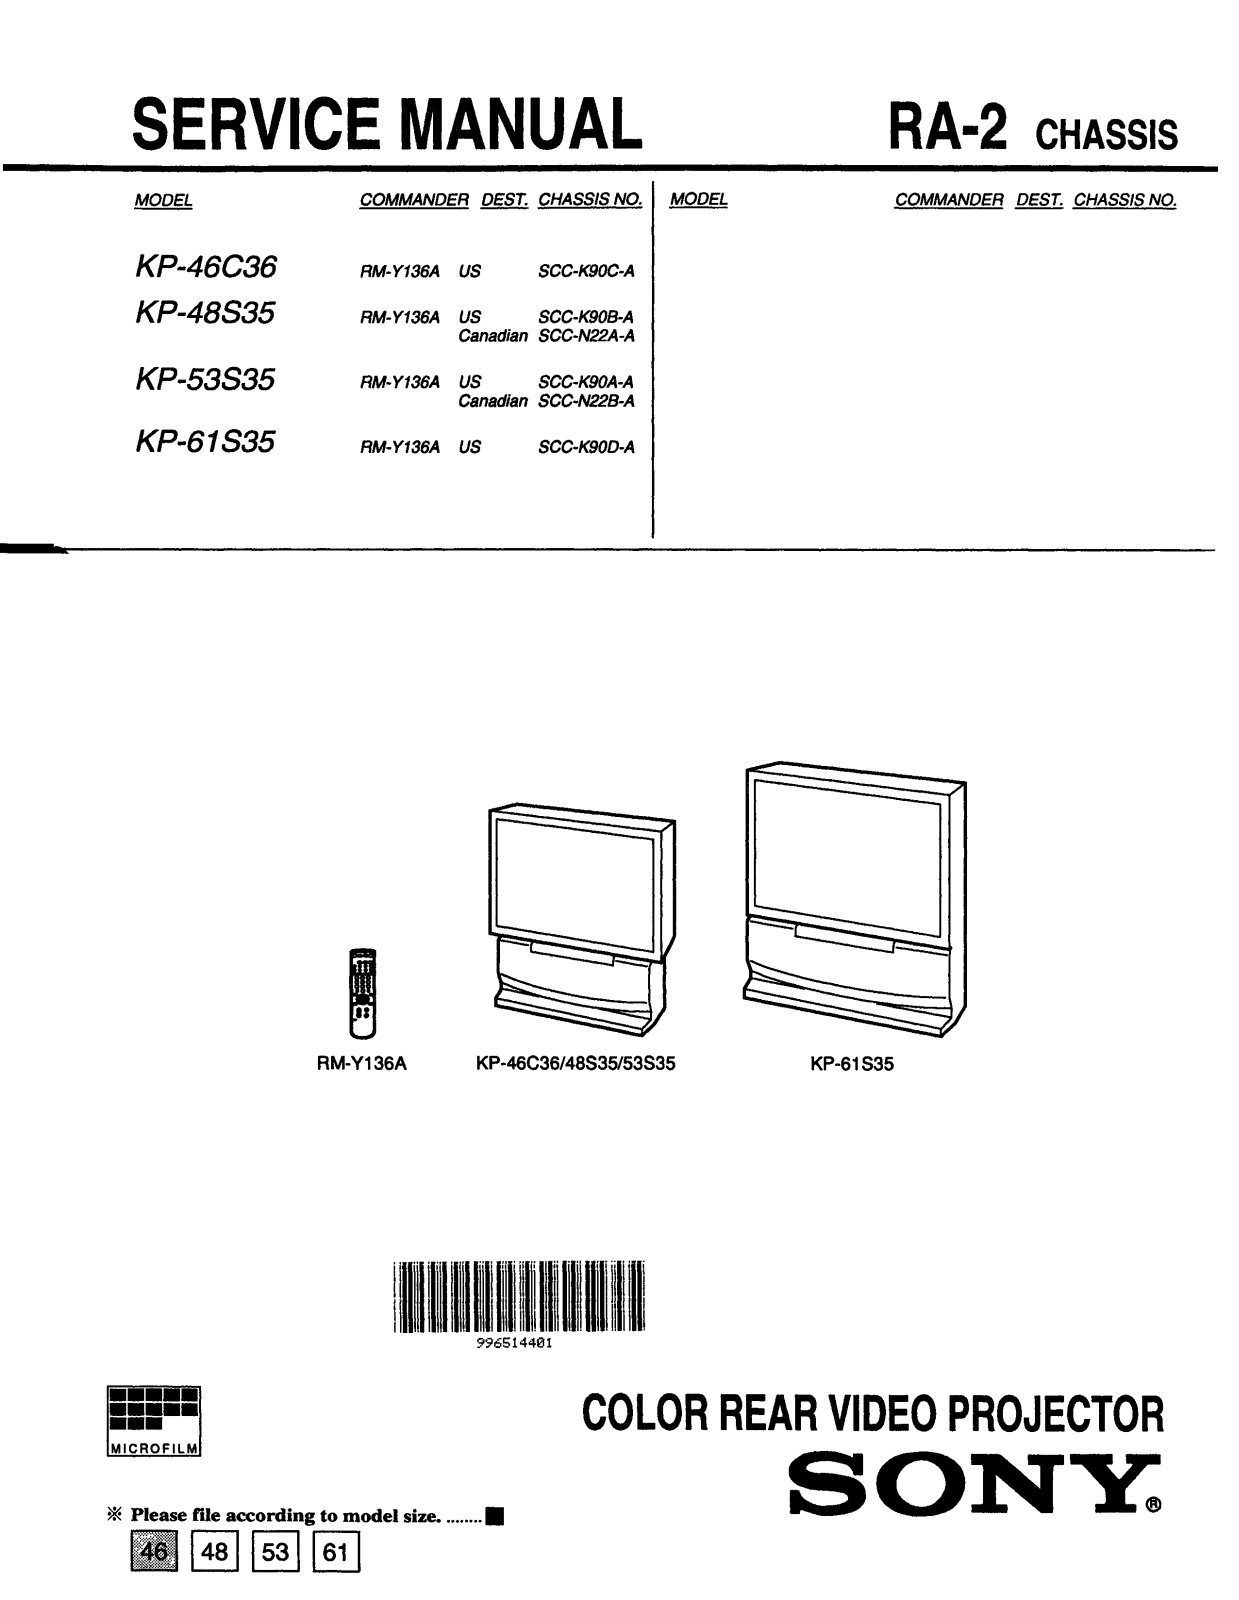 SONY KP-53S35, 48301H4, 53S35, 48C35, 61S35 Service Manual